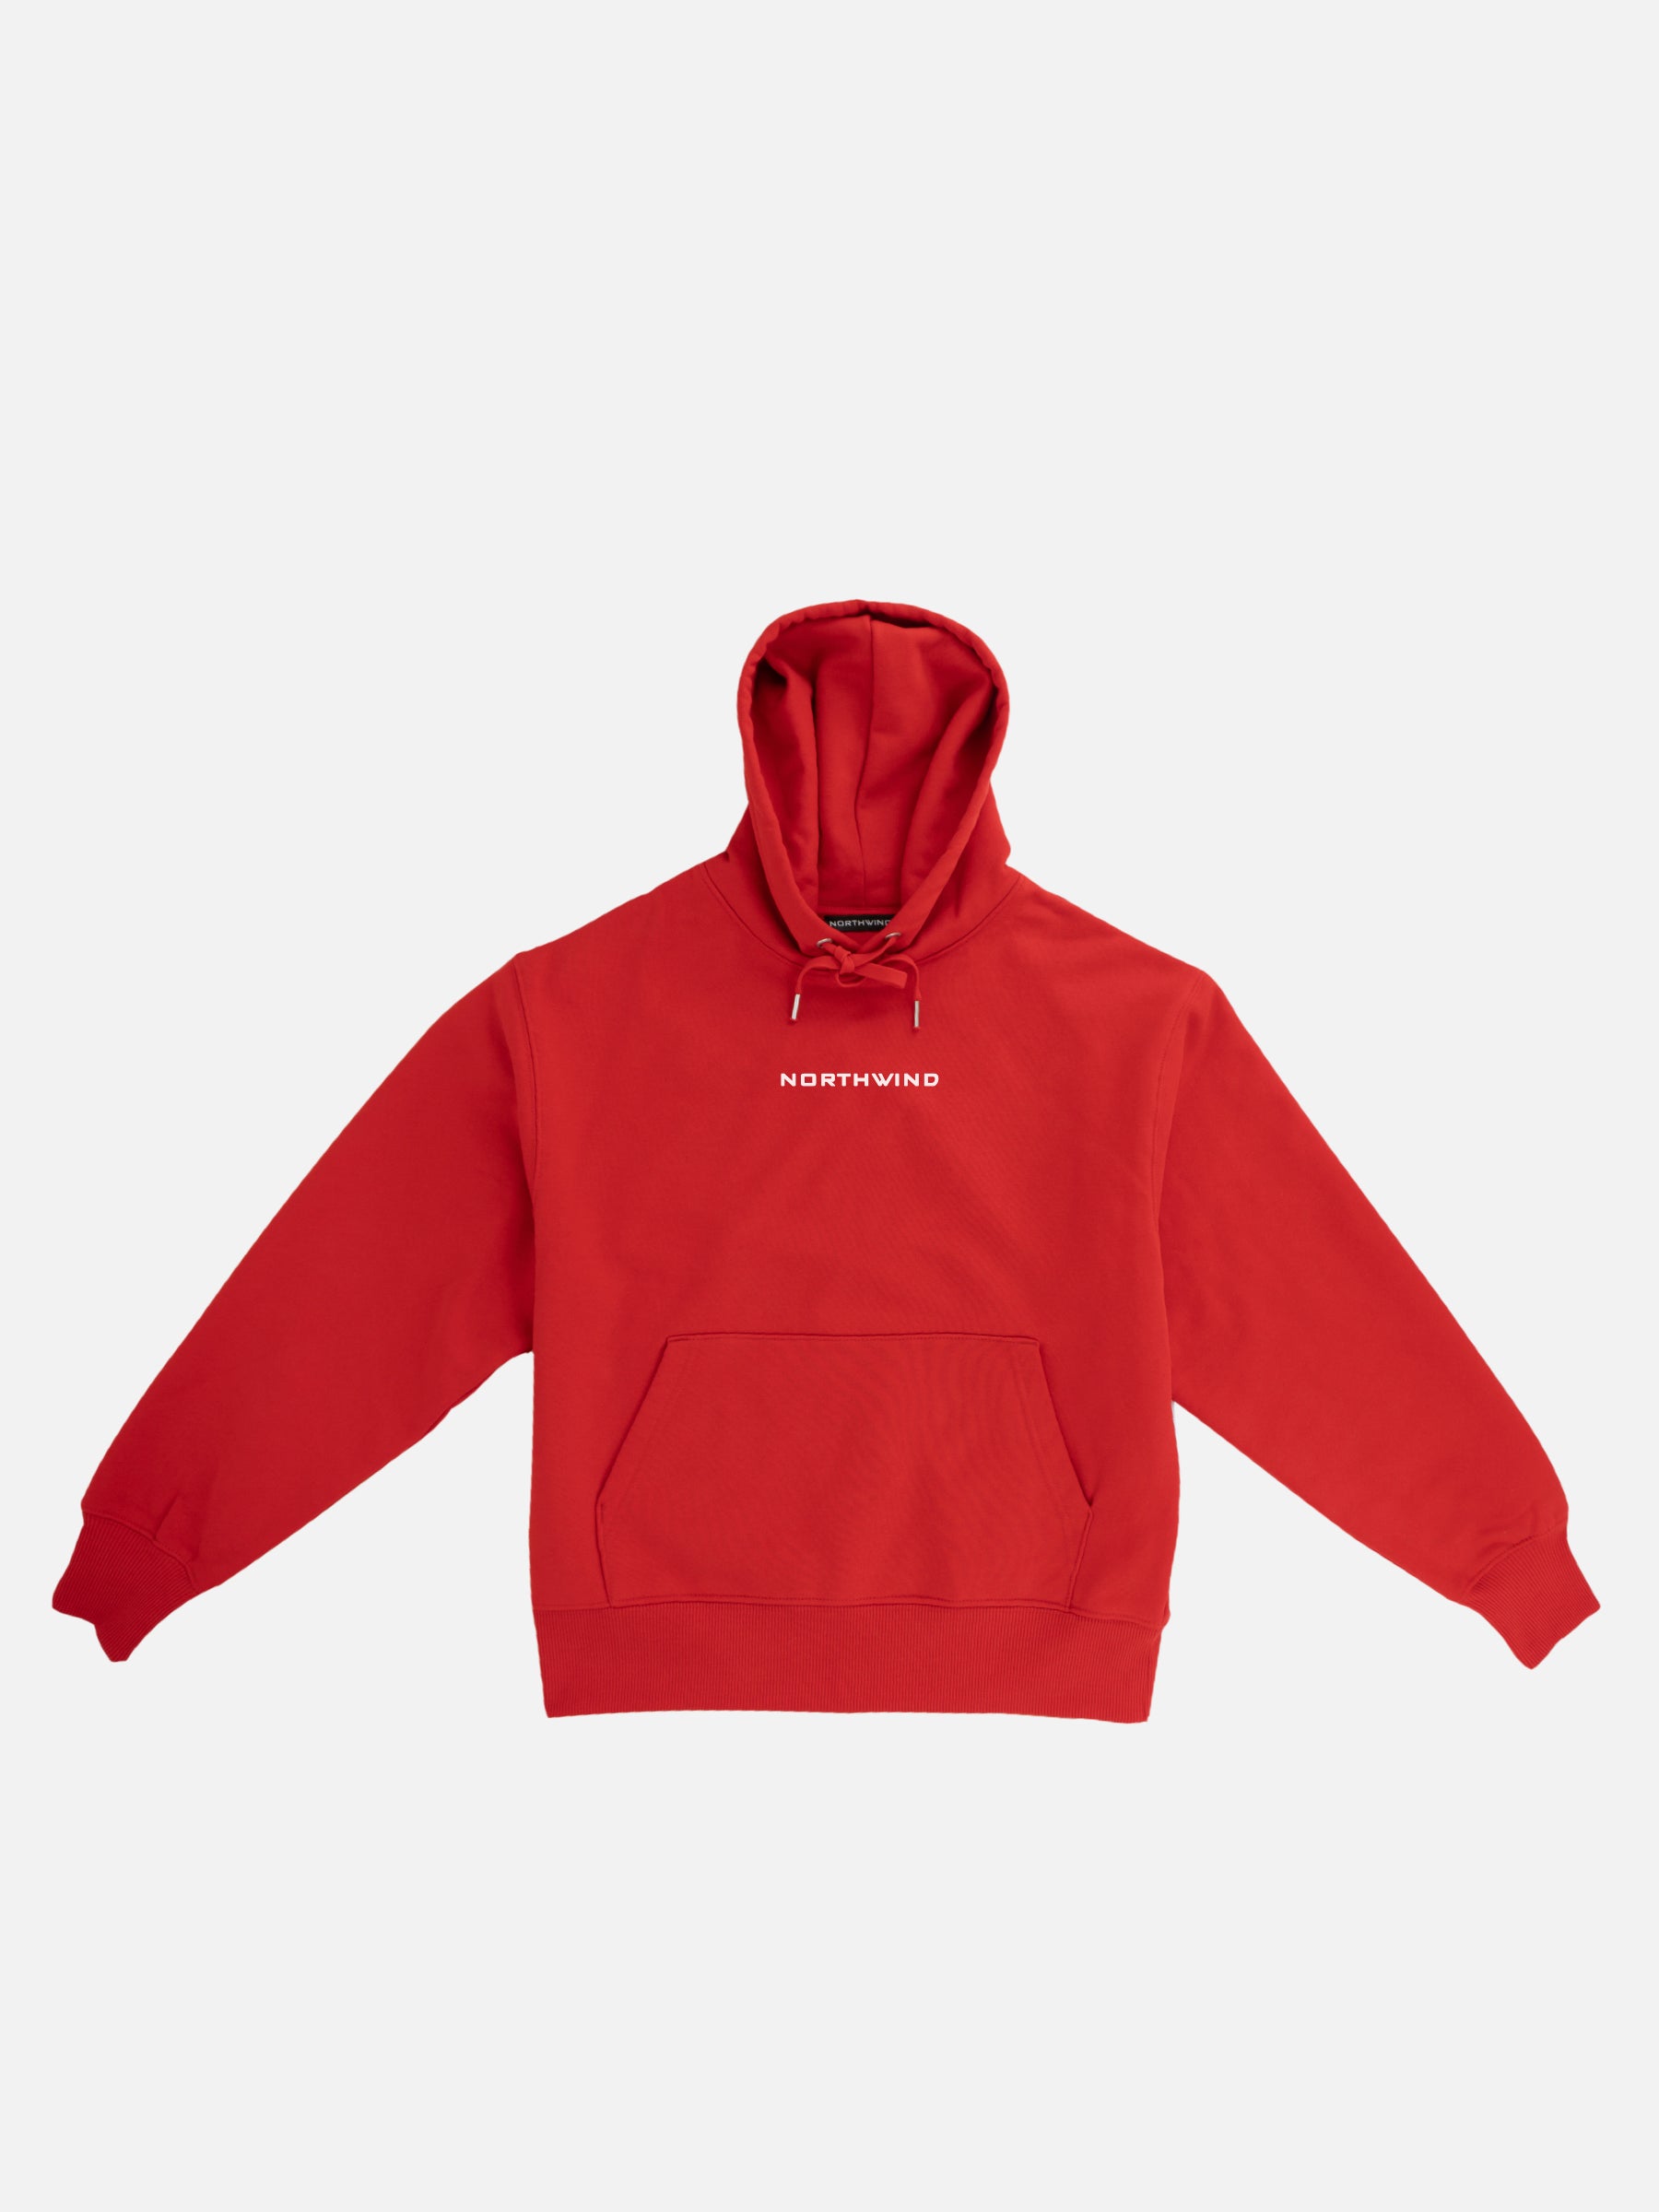 Lost Frequencies Organic Heavy Hoodie - Red